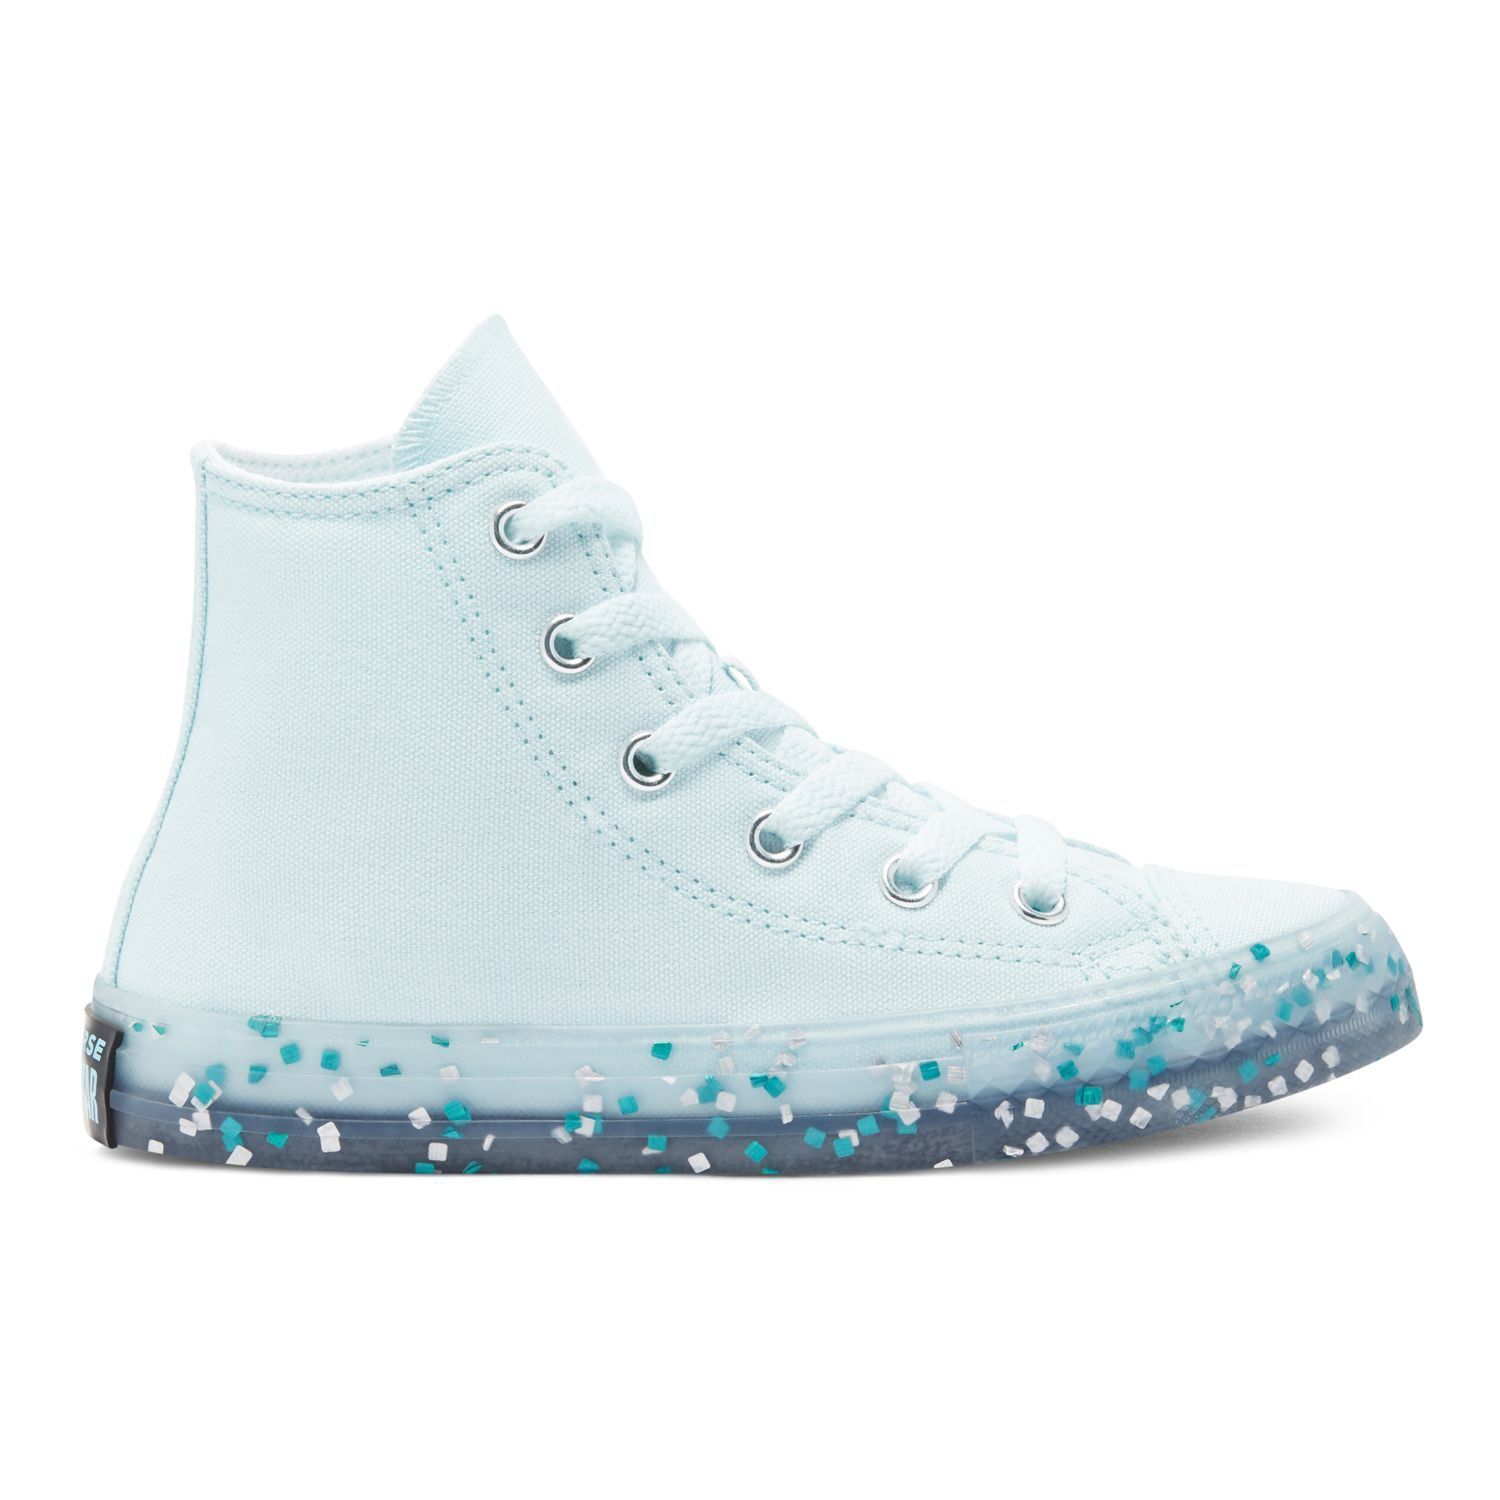 Star Translucent Confetti High Top Shoes